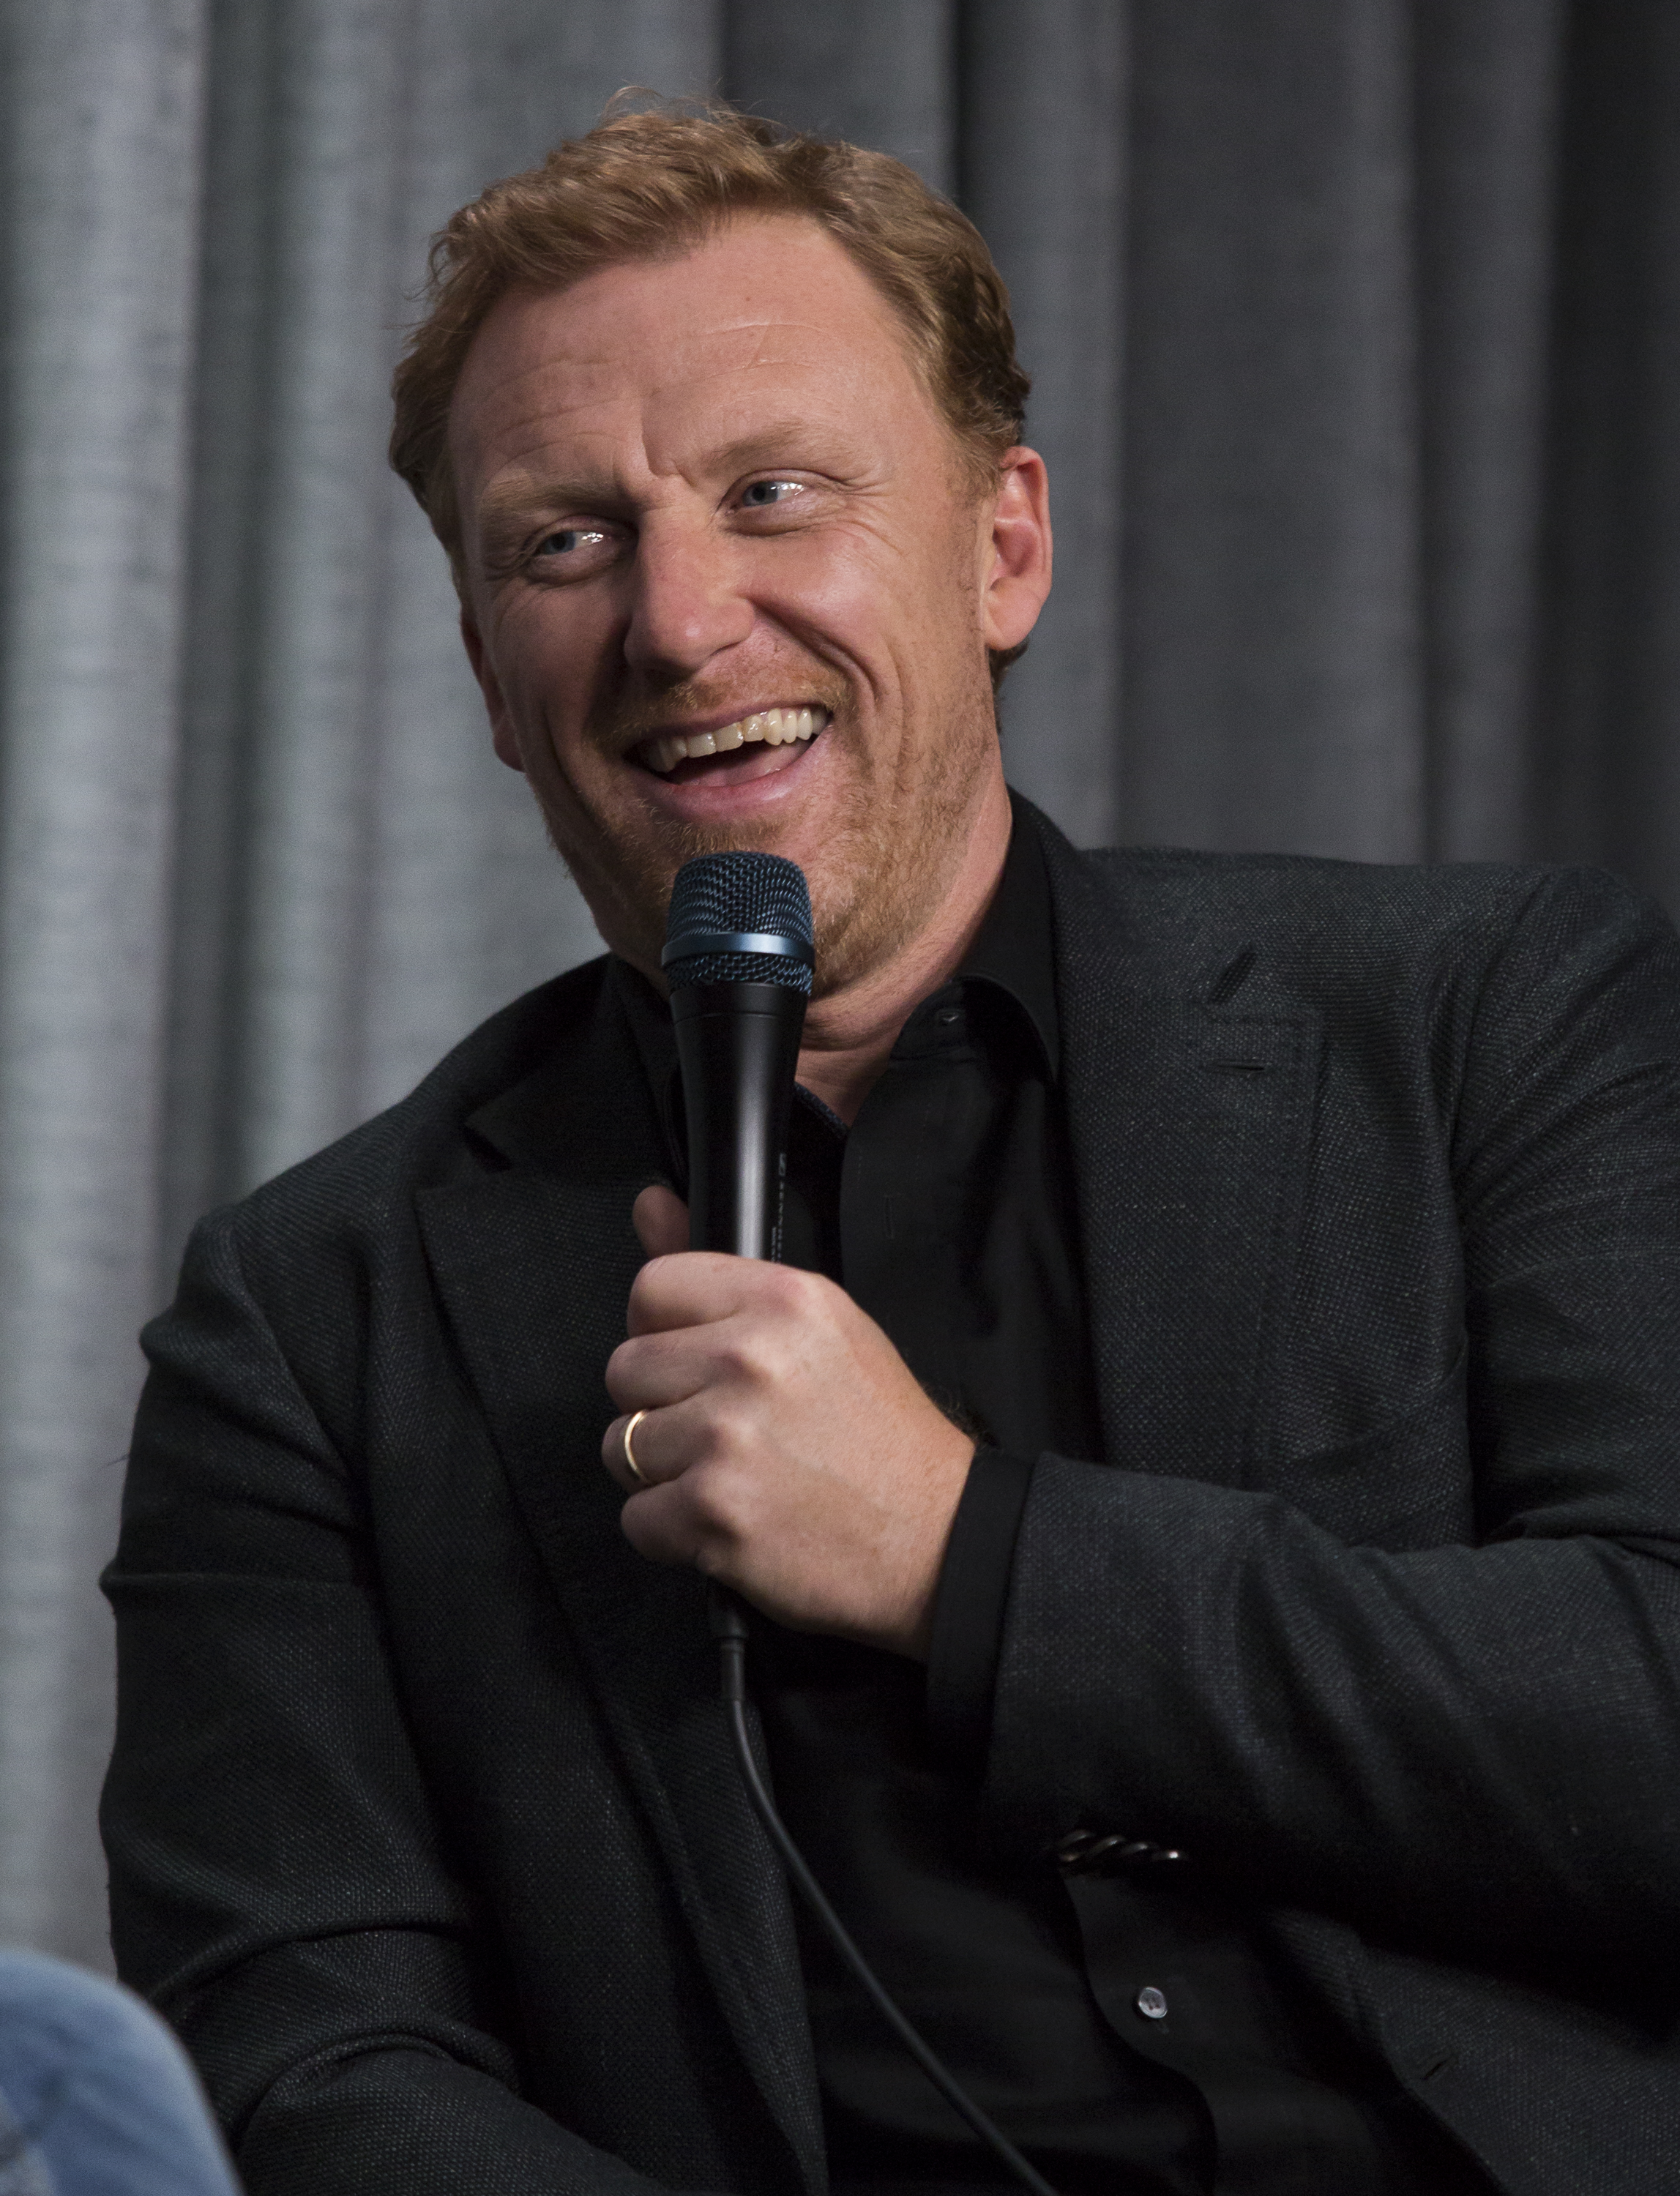 Actor Kevin McKidd attends SAG-AFTRA Foundation Conversations screening of "Grey's Anatomy" at SAG-AFTRA Foundation Screening Room on April 2, 2018, in Los Angeles, California. | Source: Getty Images